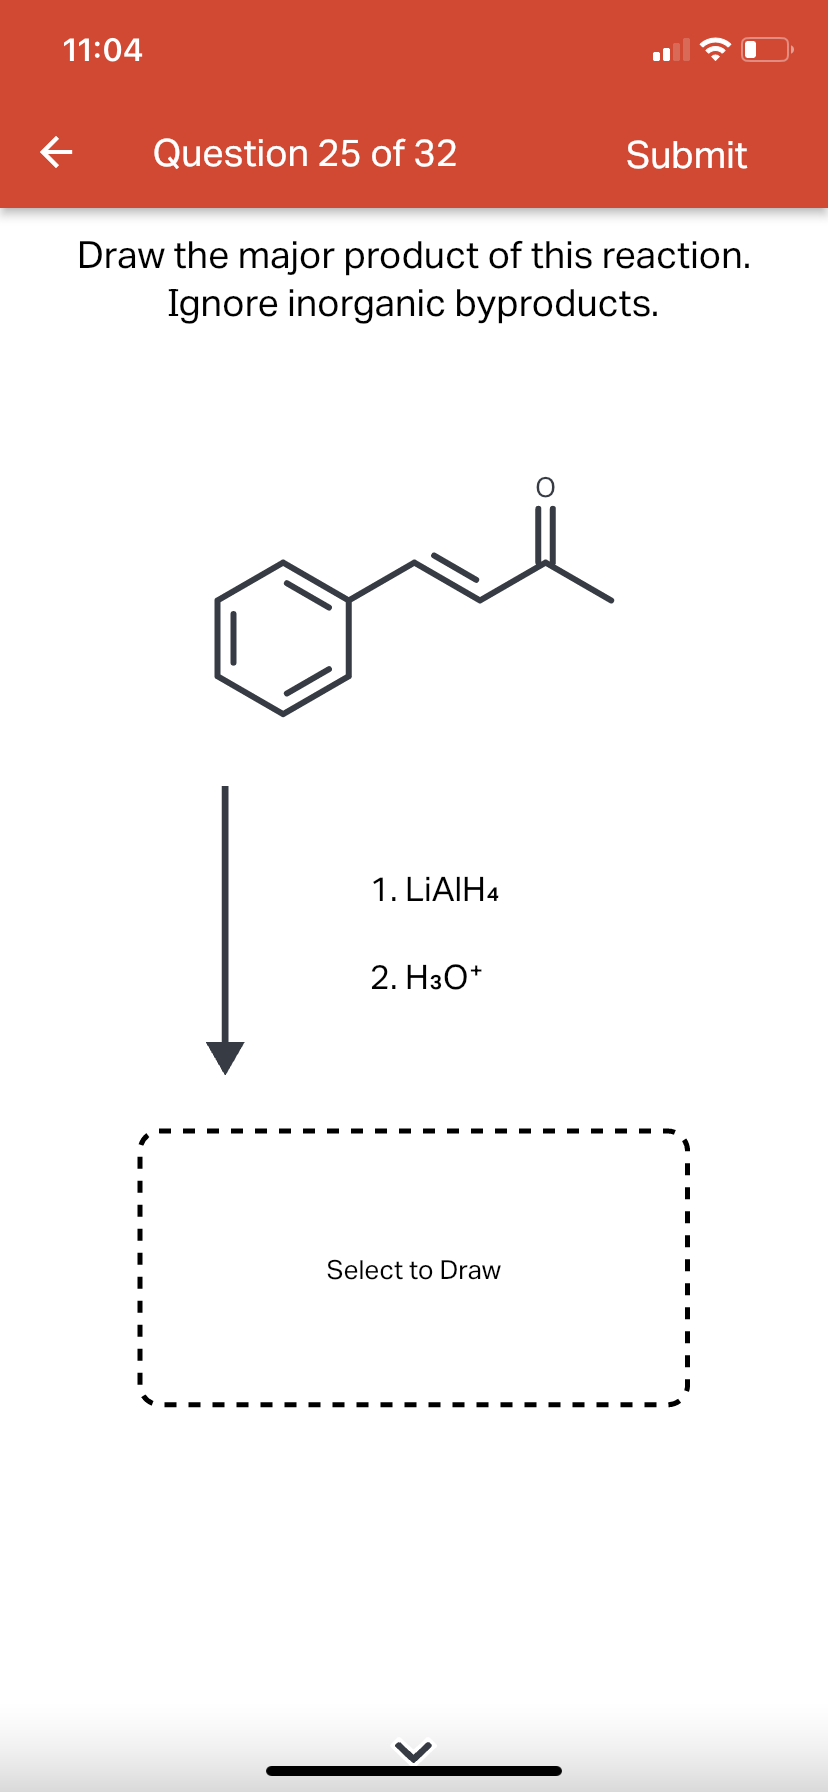 11:04
←
Question 25 of 32
Draw the major product of this reaction.
Ignore inorganic byproducts.
1. LiAlH4
2. H3O+
Select to Draw
Submit
O